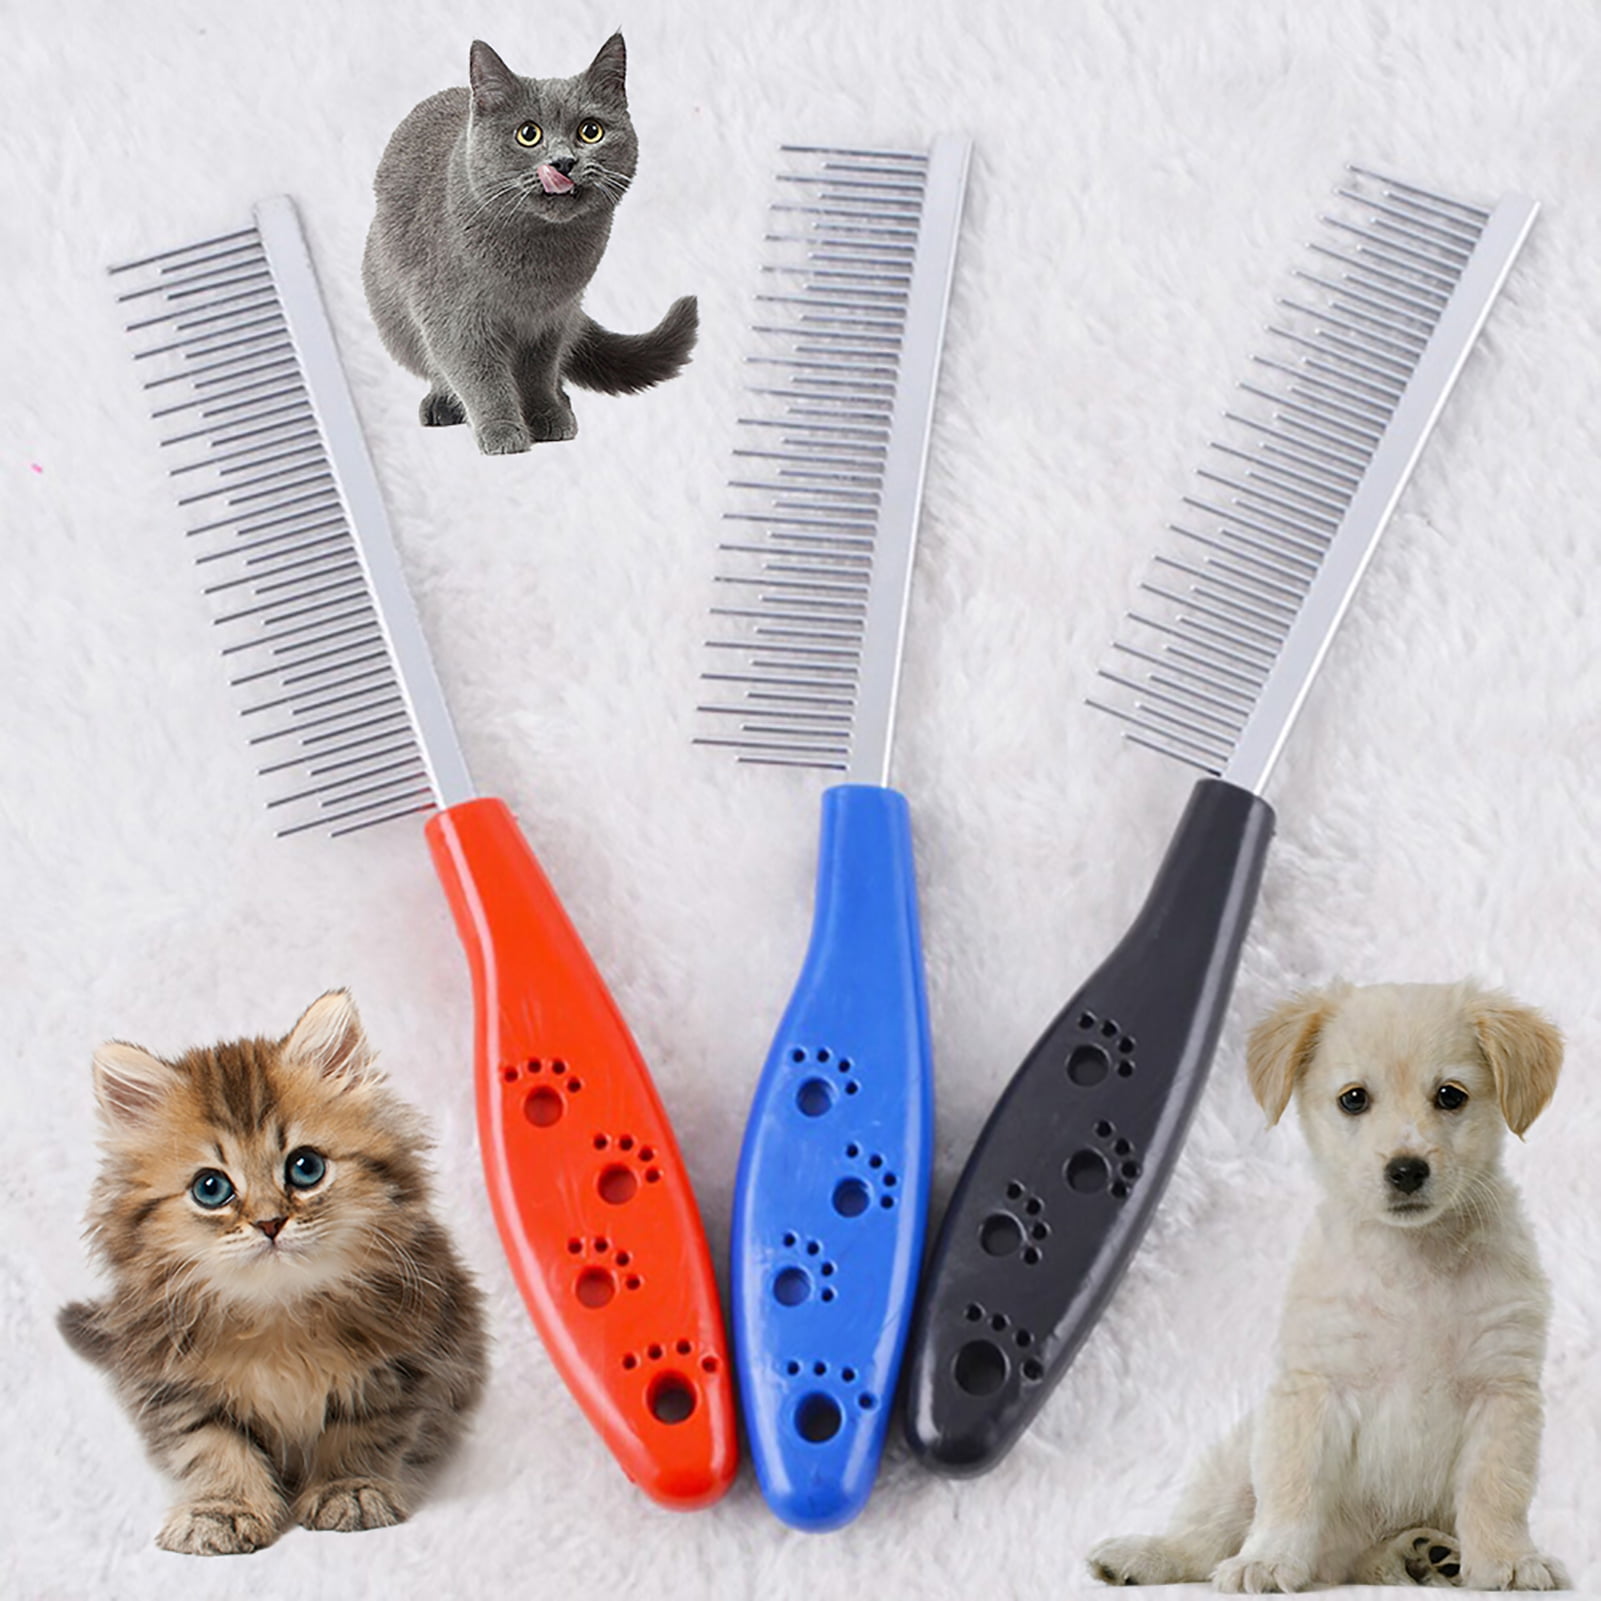 Pet Cat Dog Hair Fur Shedding Trimmer Grooming Dematting Rake Comb Brush Tool Dog Stainless Comb for Removing Knots & Tangles DIY Dog&Cat Comb Best Pet Hair Comb for Home Grooming Kit S, Red 